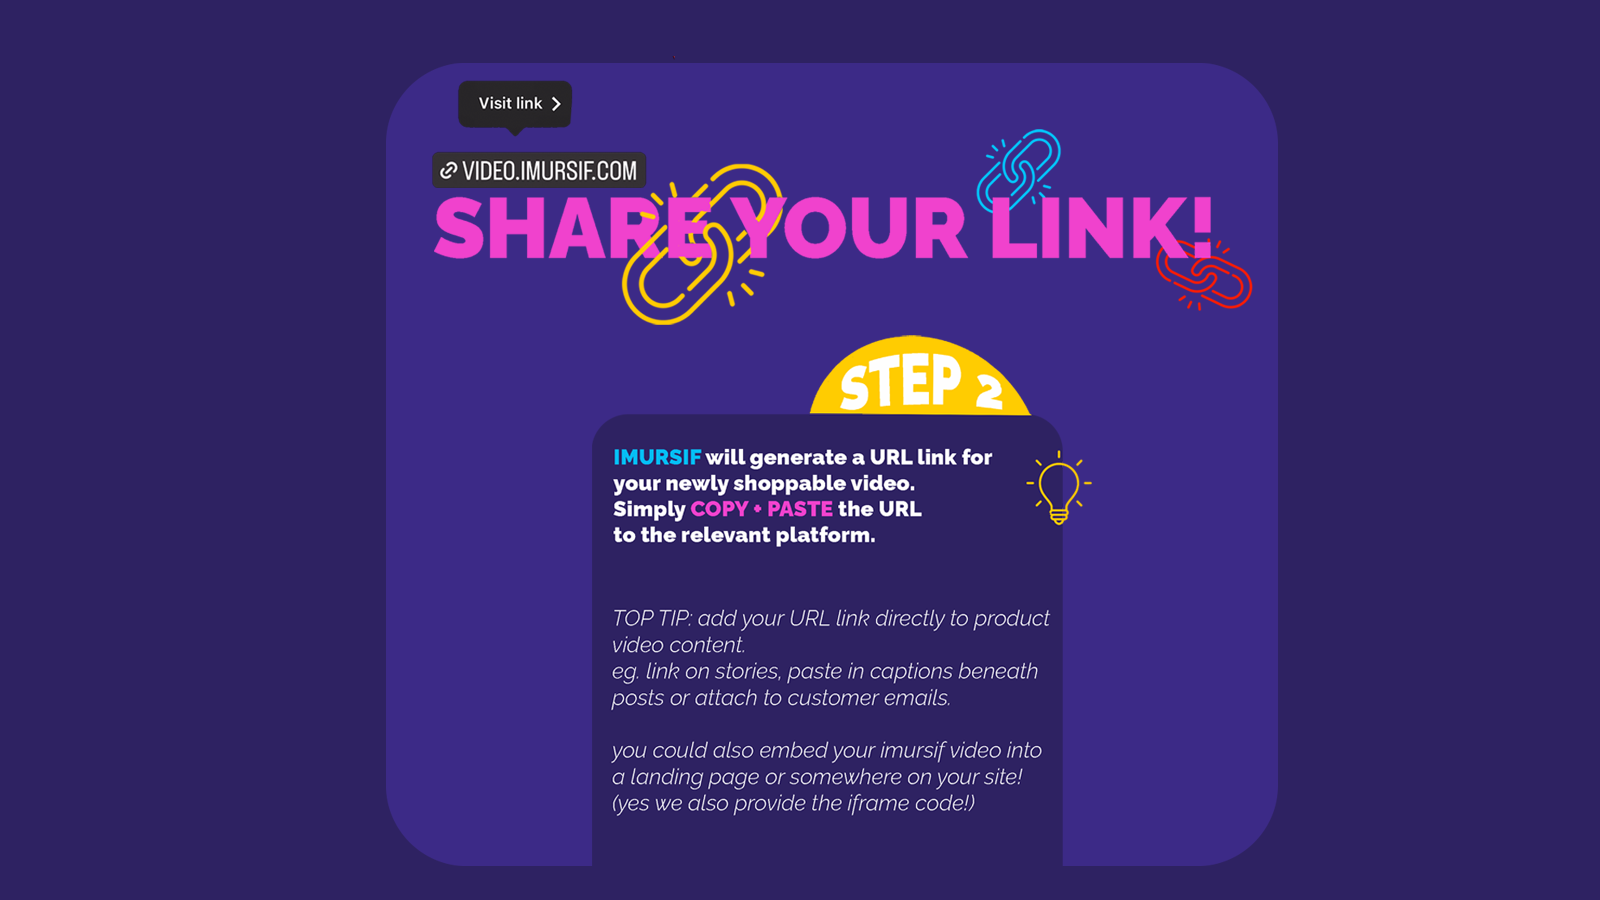 Step 2 - share your auto-generated link